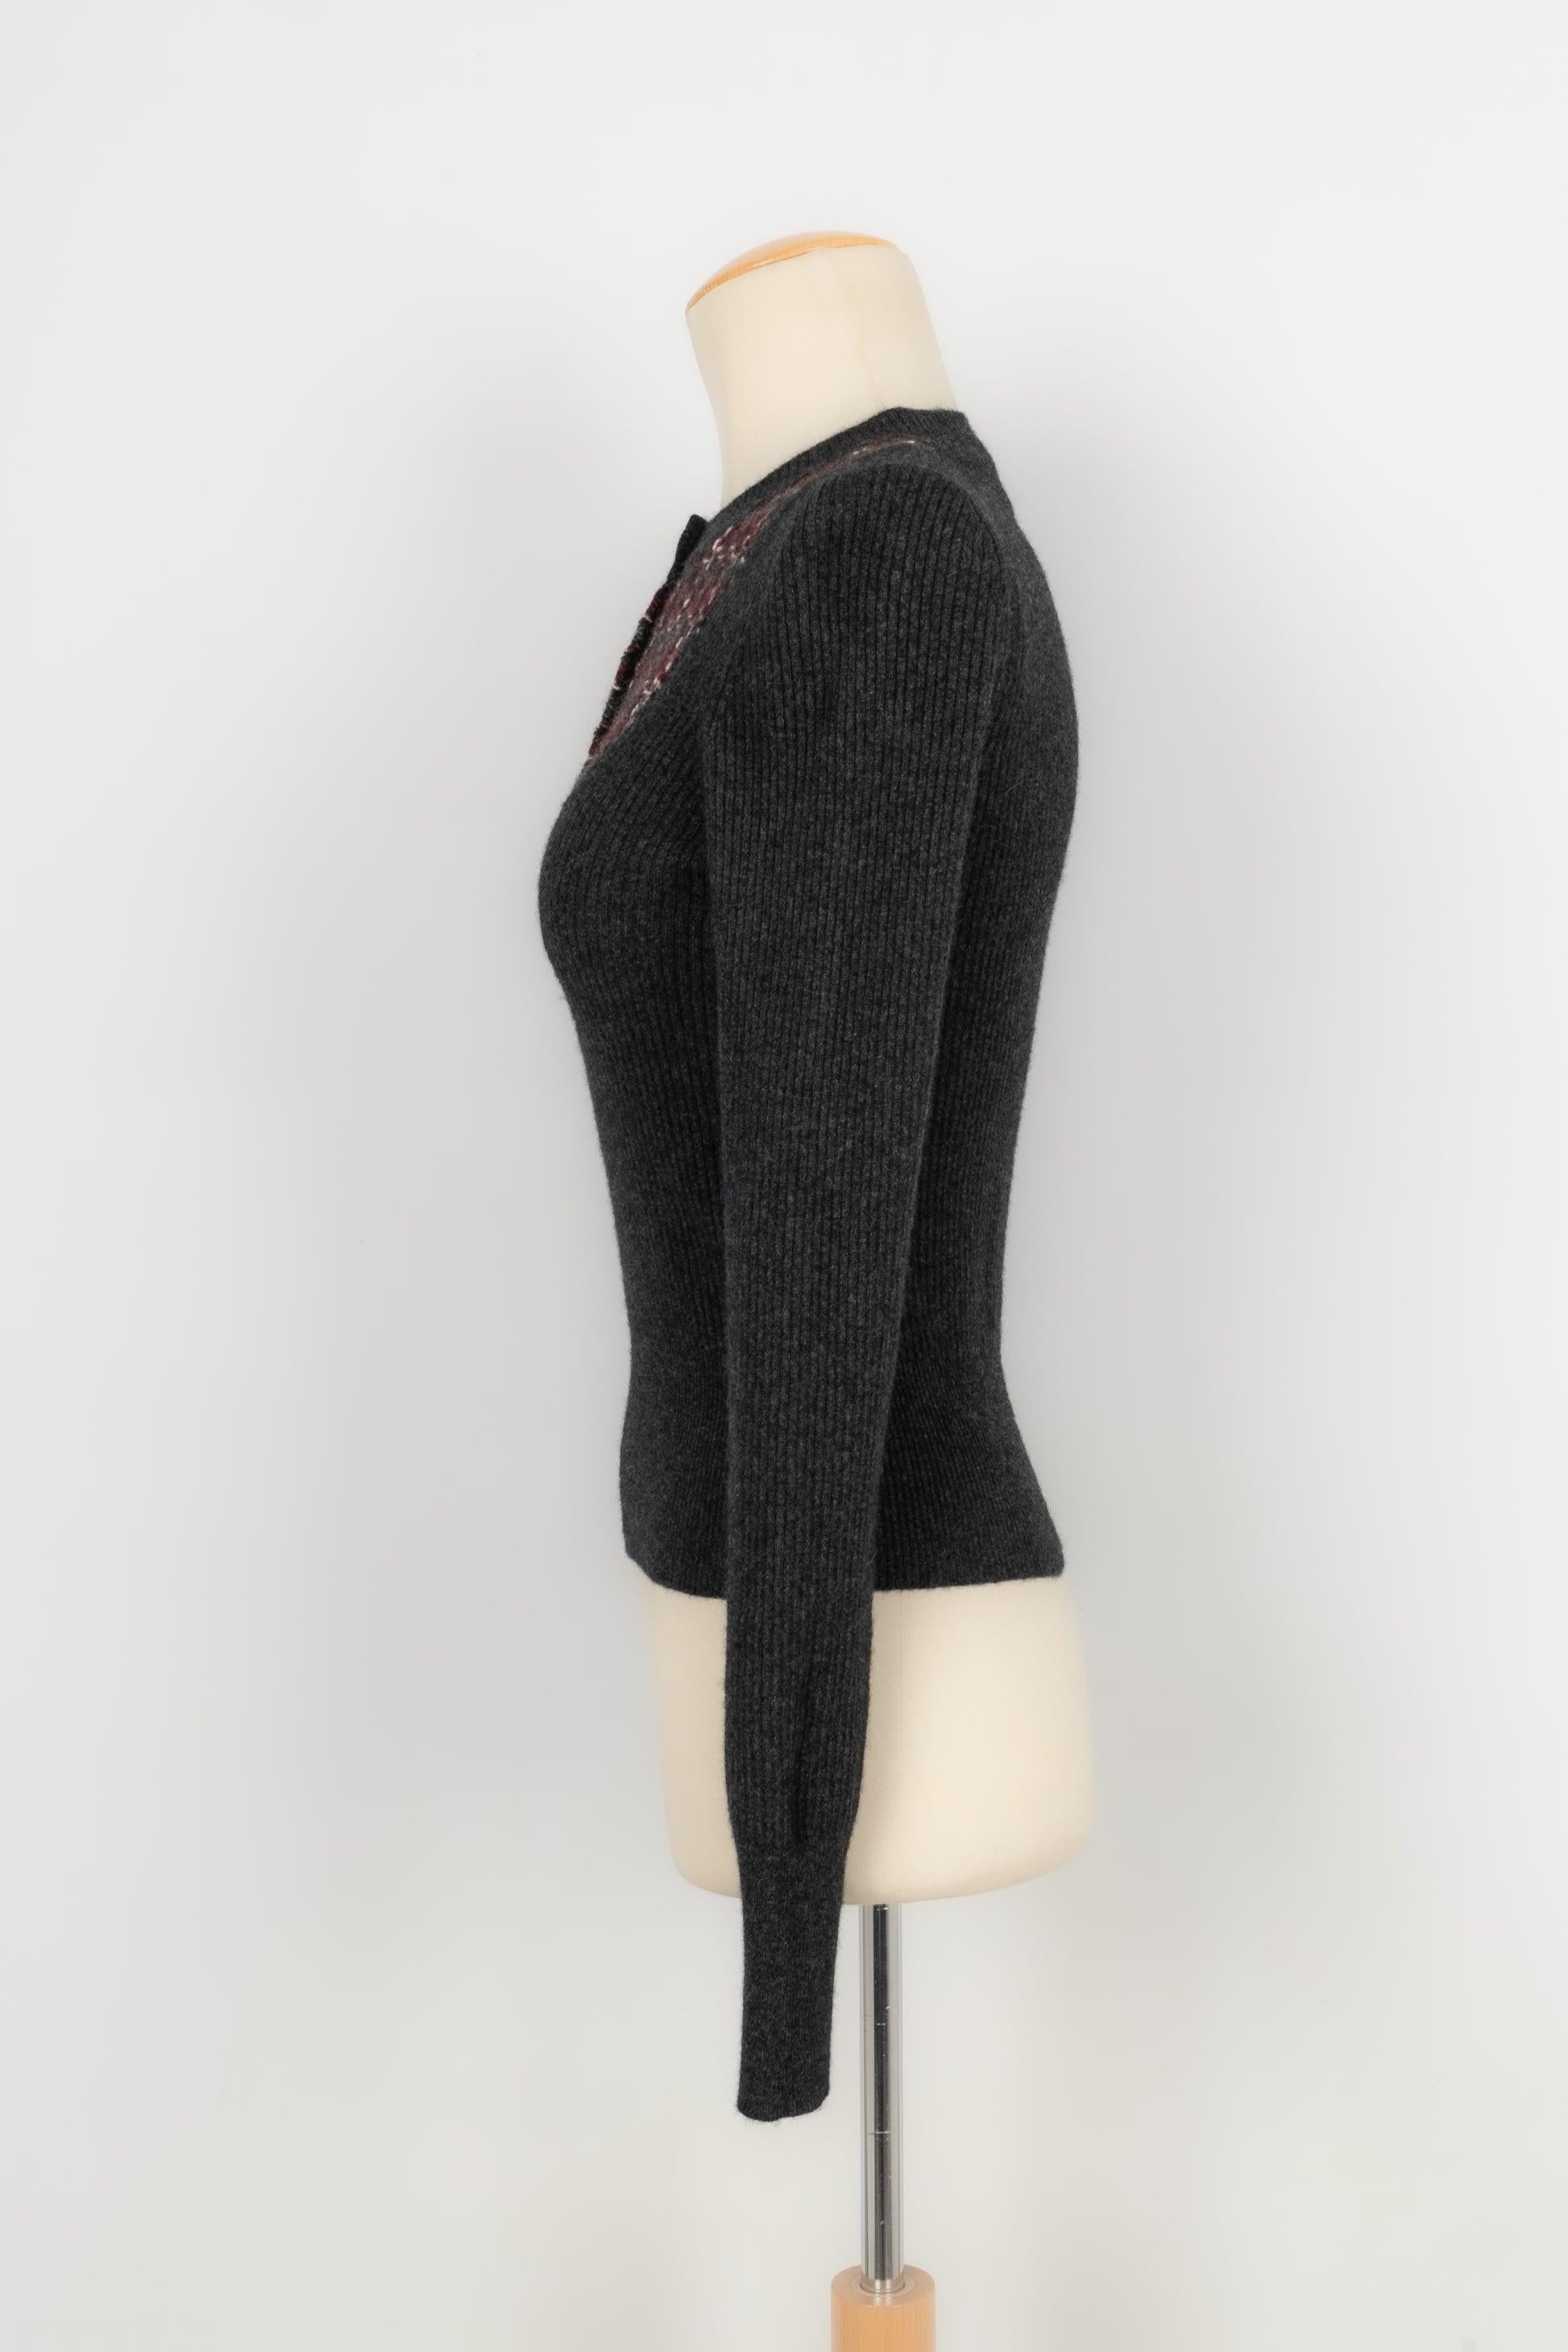 Chanel - (Made in Italy) Cashmere and wool sweater. Size 36FR. Fall-Winter 2007 Ready-to-Wear Collection.

Additional information:
Condition: Very good condition
Dimensions: Shoulder width: 38 cm
Sleeve length: 64 cm
Length: 50 cm

Seller reference: